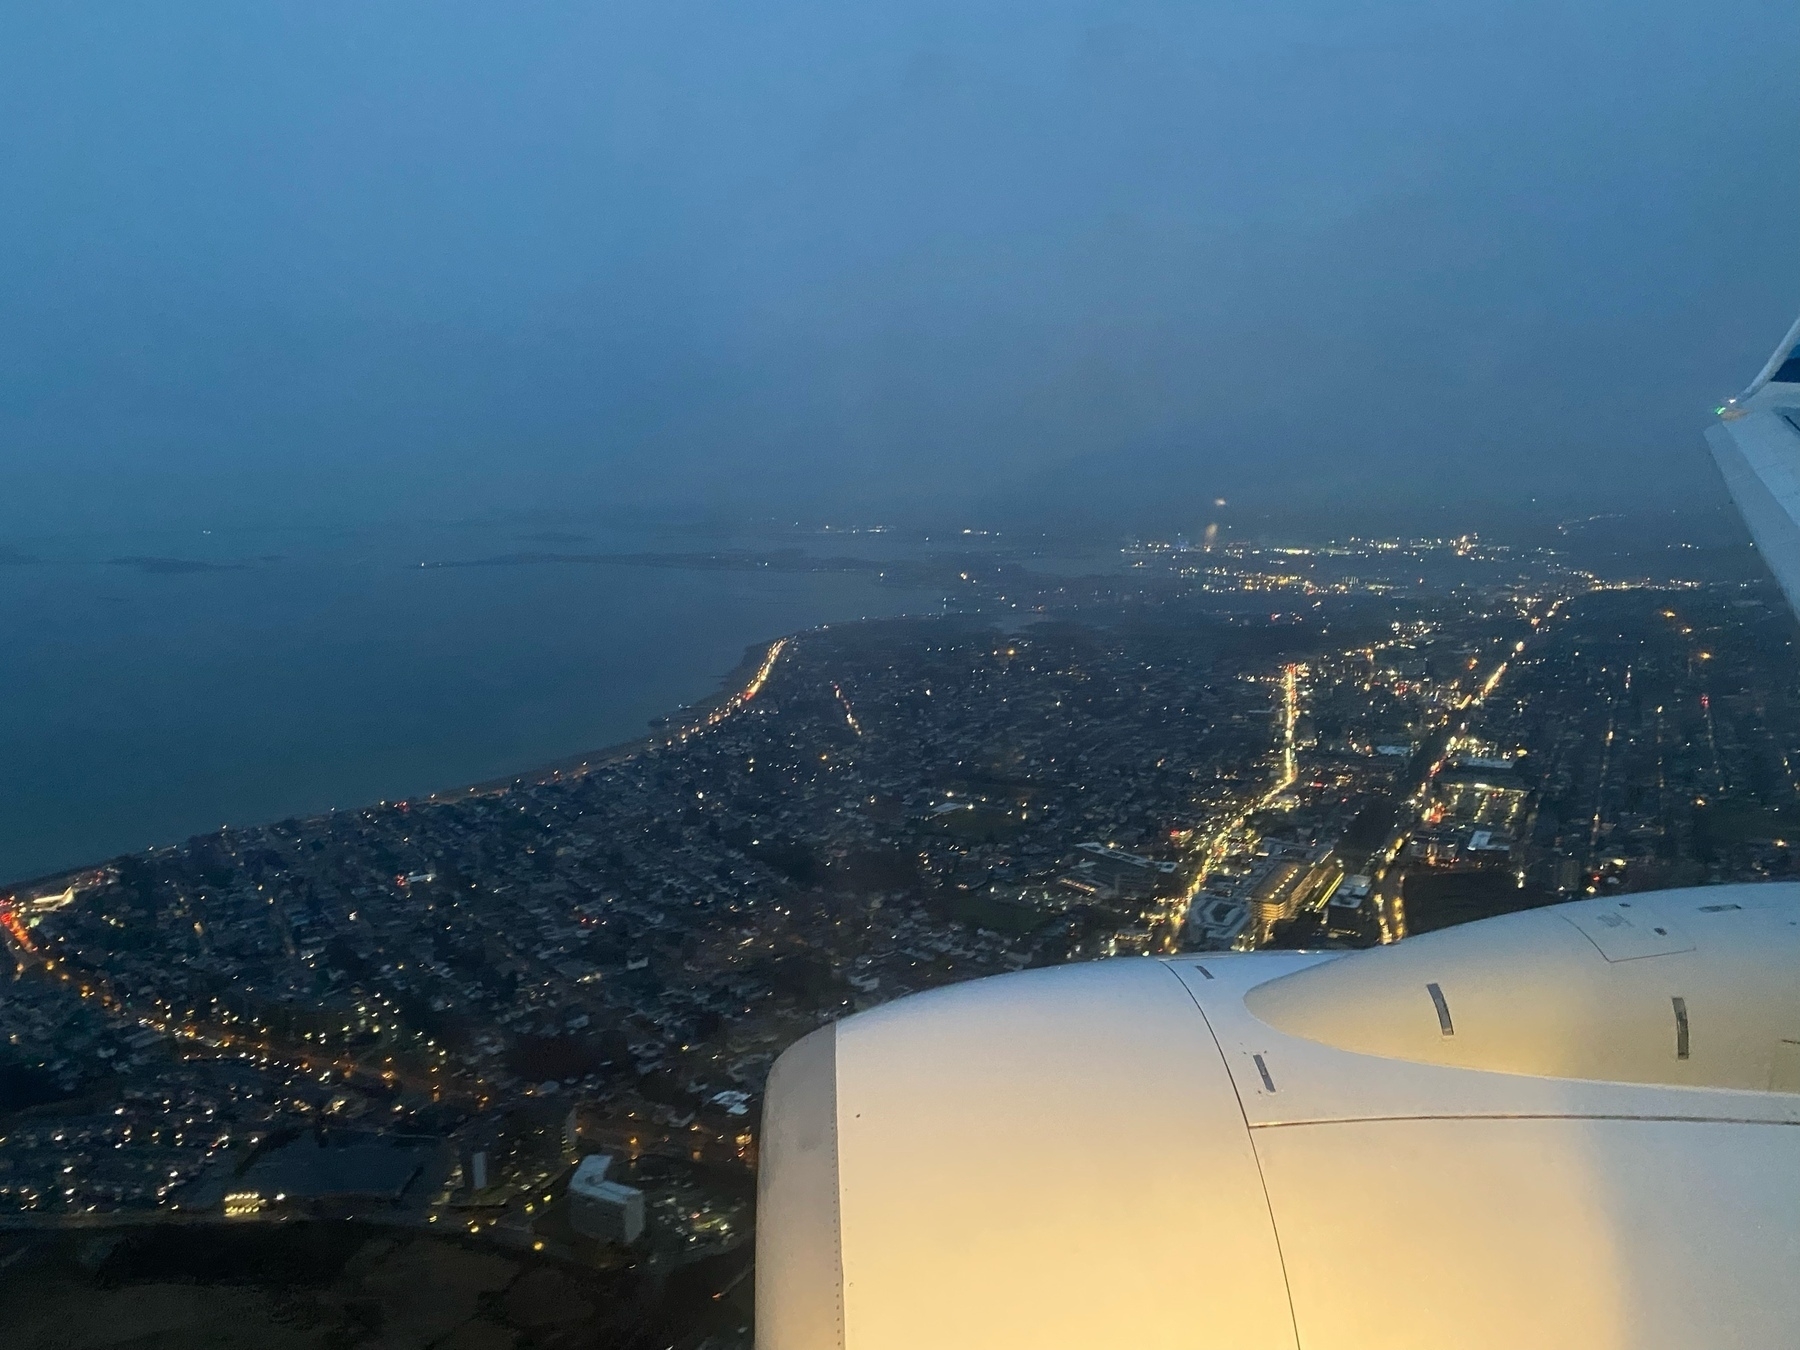 View out a plane window of the shoreline in the evening with the lights of streets and houses below.